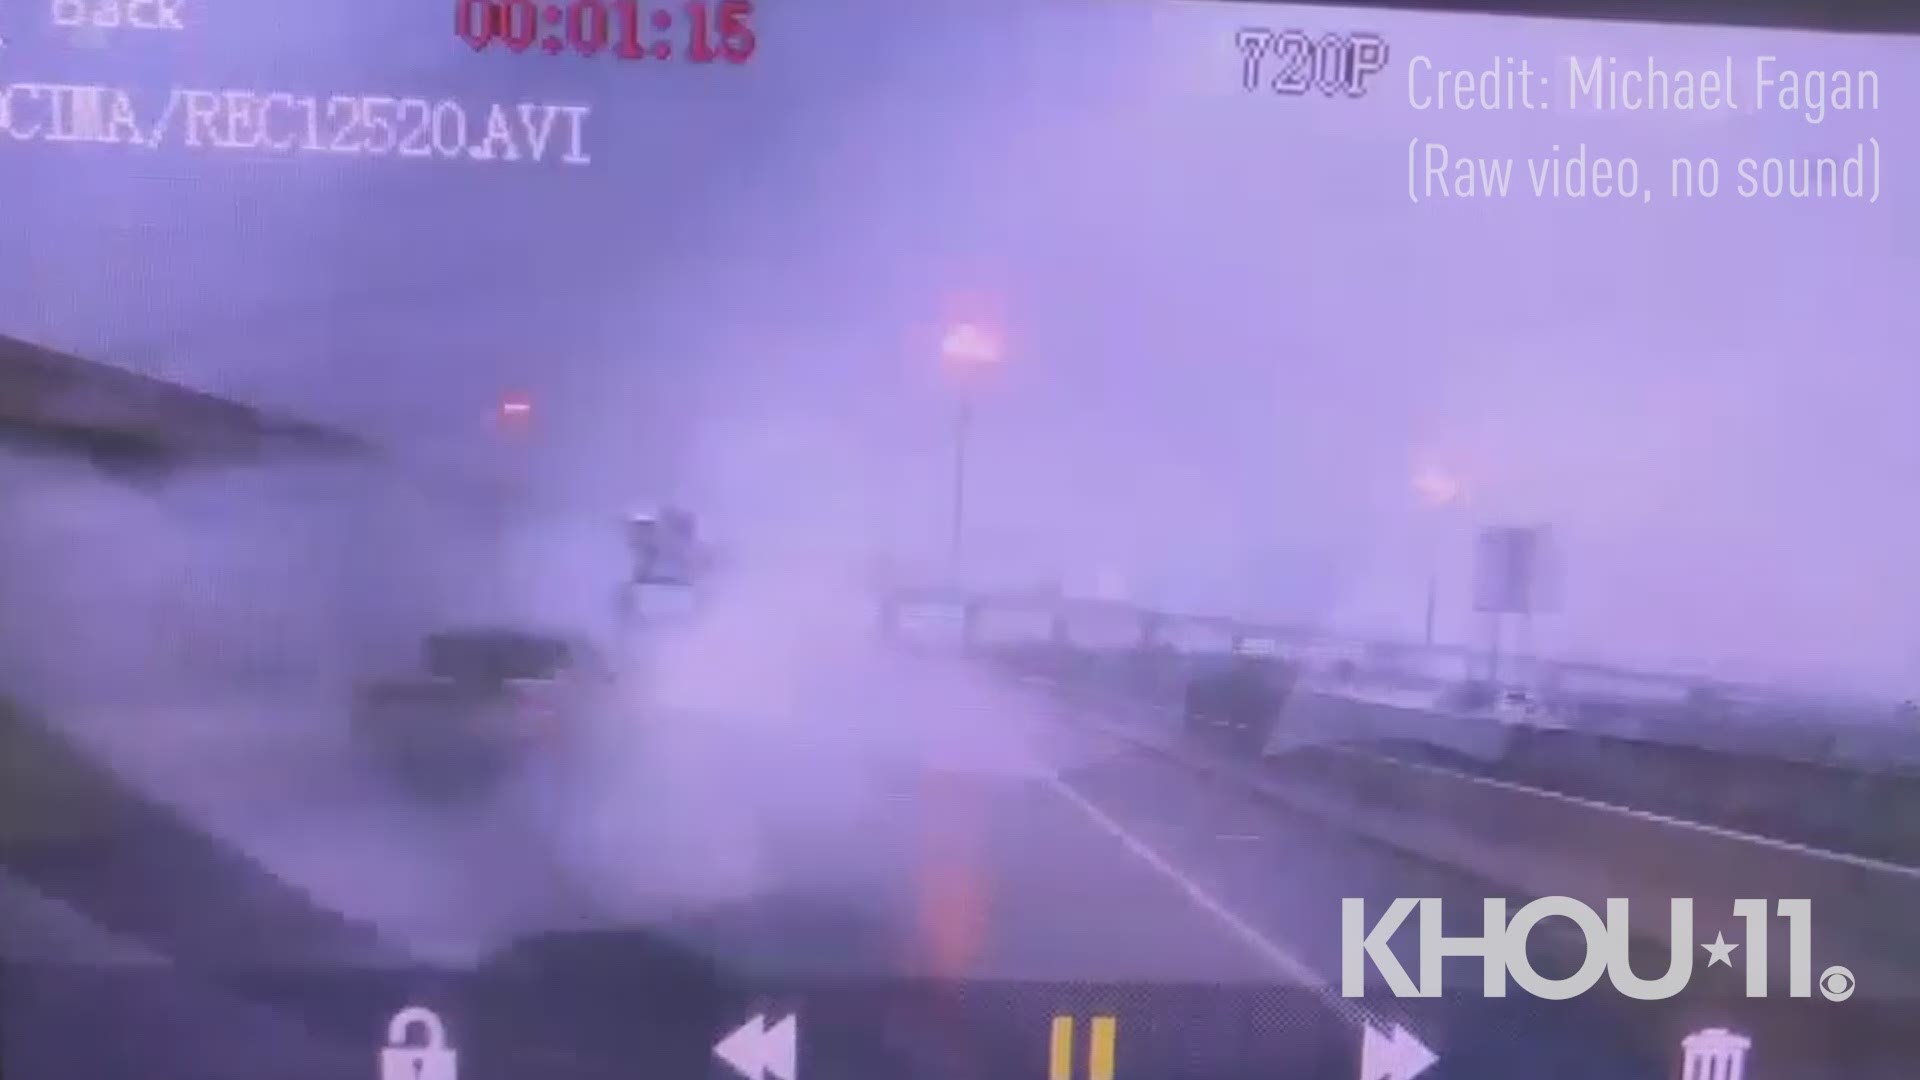 KHOU 11 viewer Michael Fagan's dash camera captured a pickup truck spinning out of control on Highway 225 near Highway 146 on Wednesday morning. The crash happened during heavy rainfall across Southeast Texas.